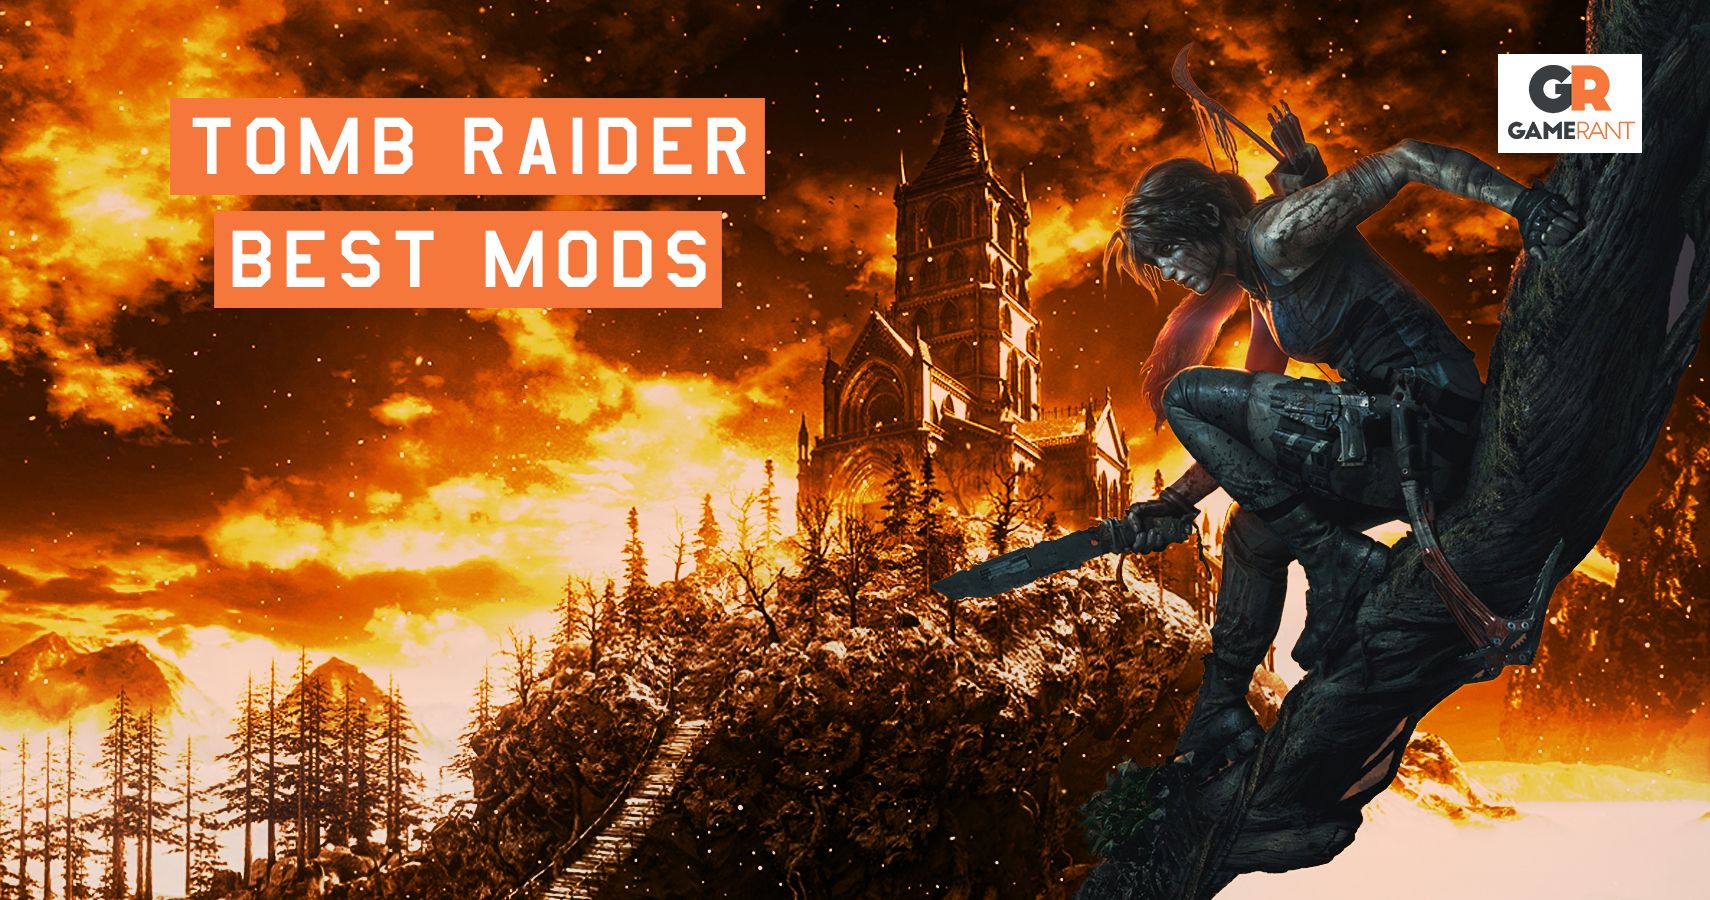 18 Amazing Tomb Raider Mods That Make The Games Even Better